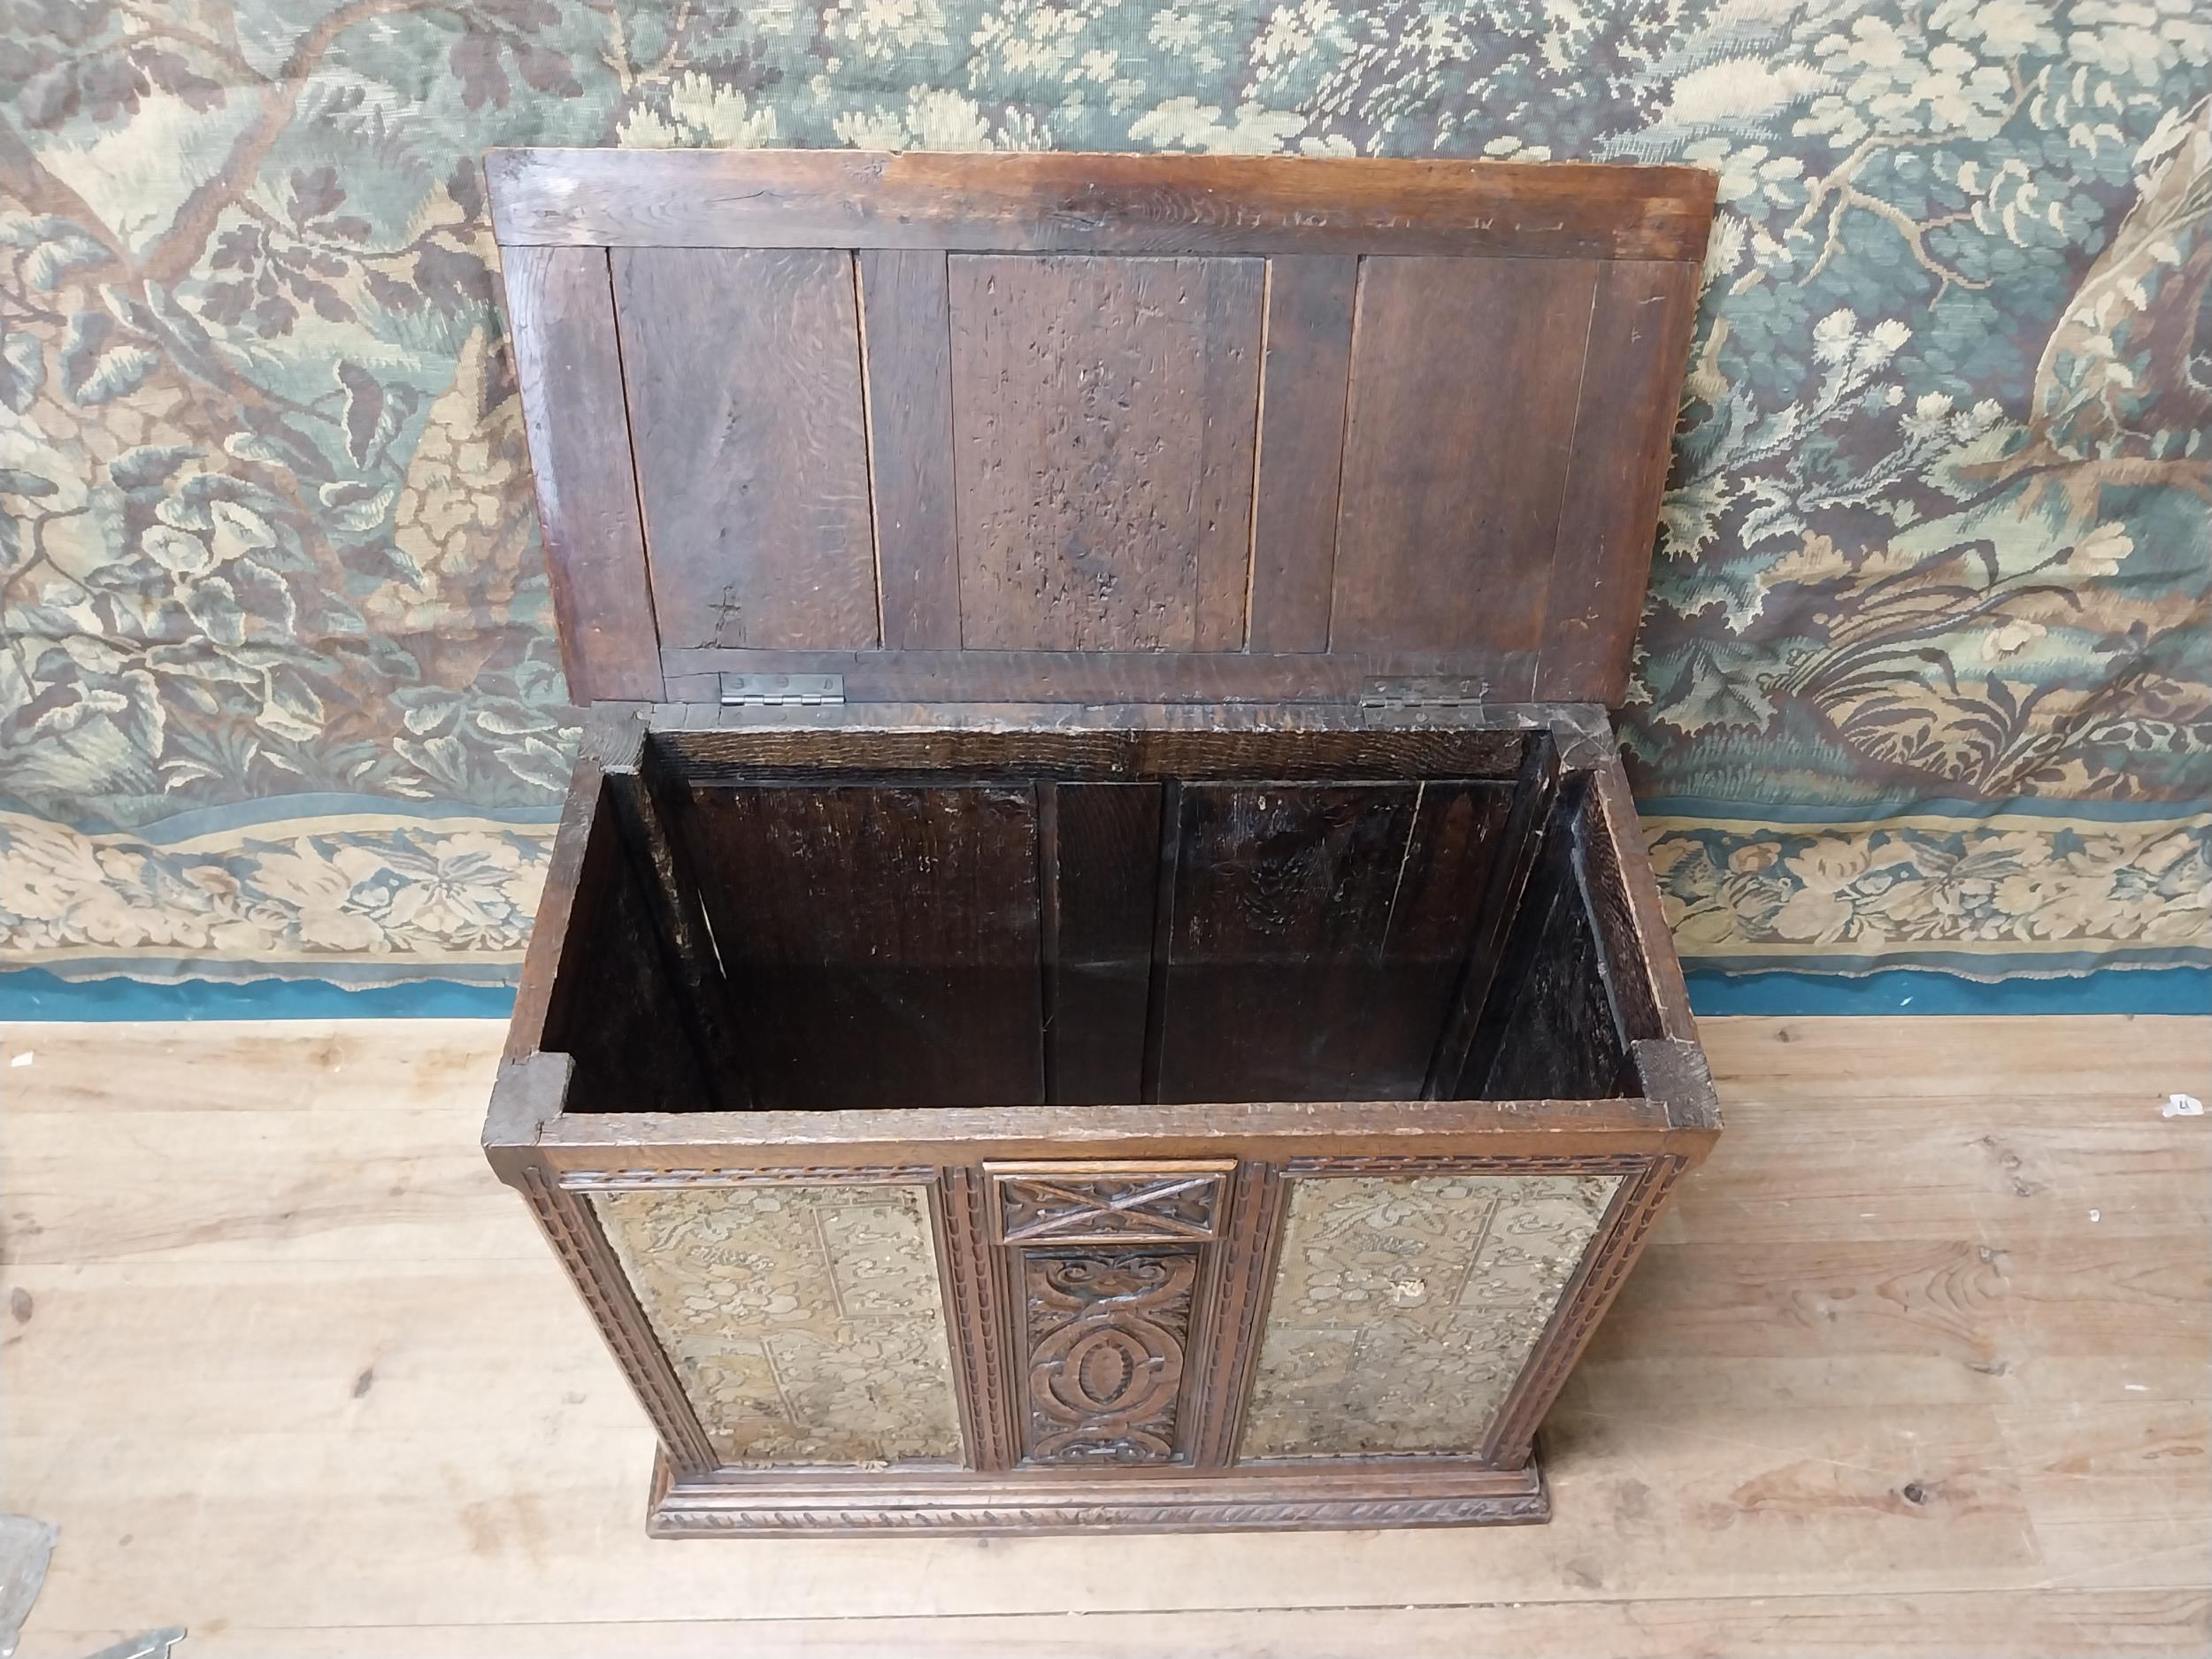 19th C. carved oak blanket box with tapestry panels {75 cm H x 85 cm W x 44 cm D}. - Image 5 of 8